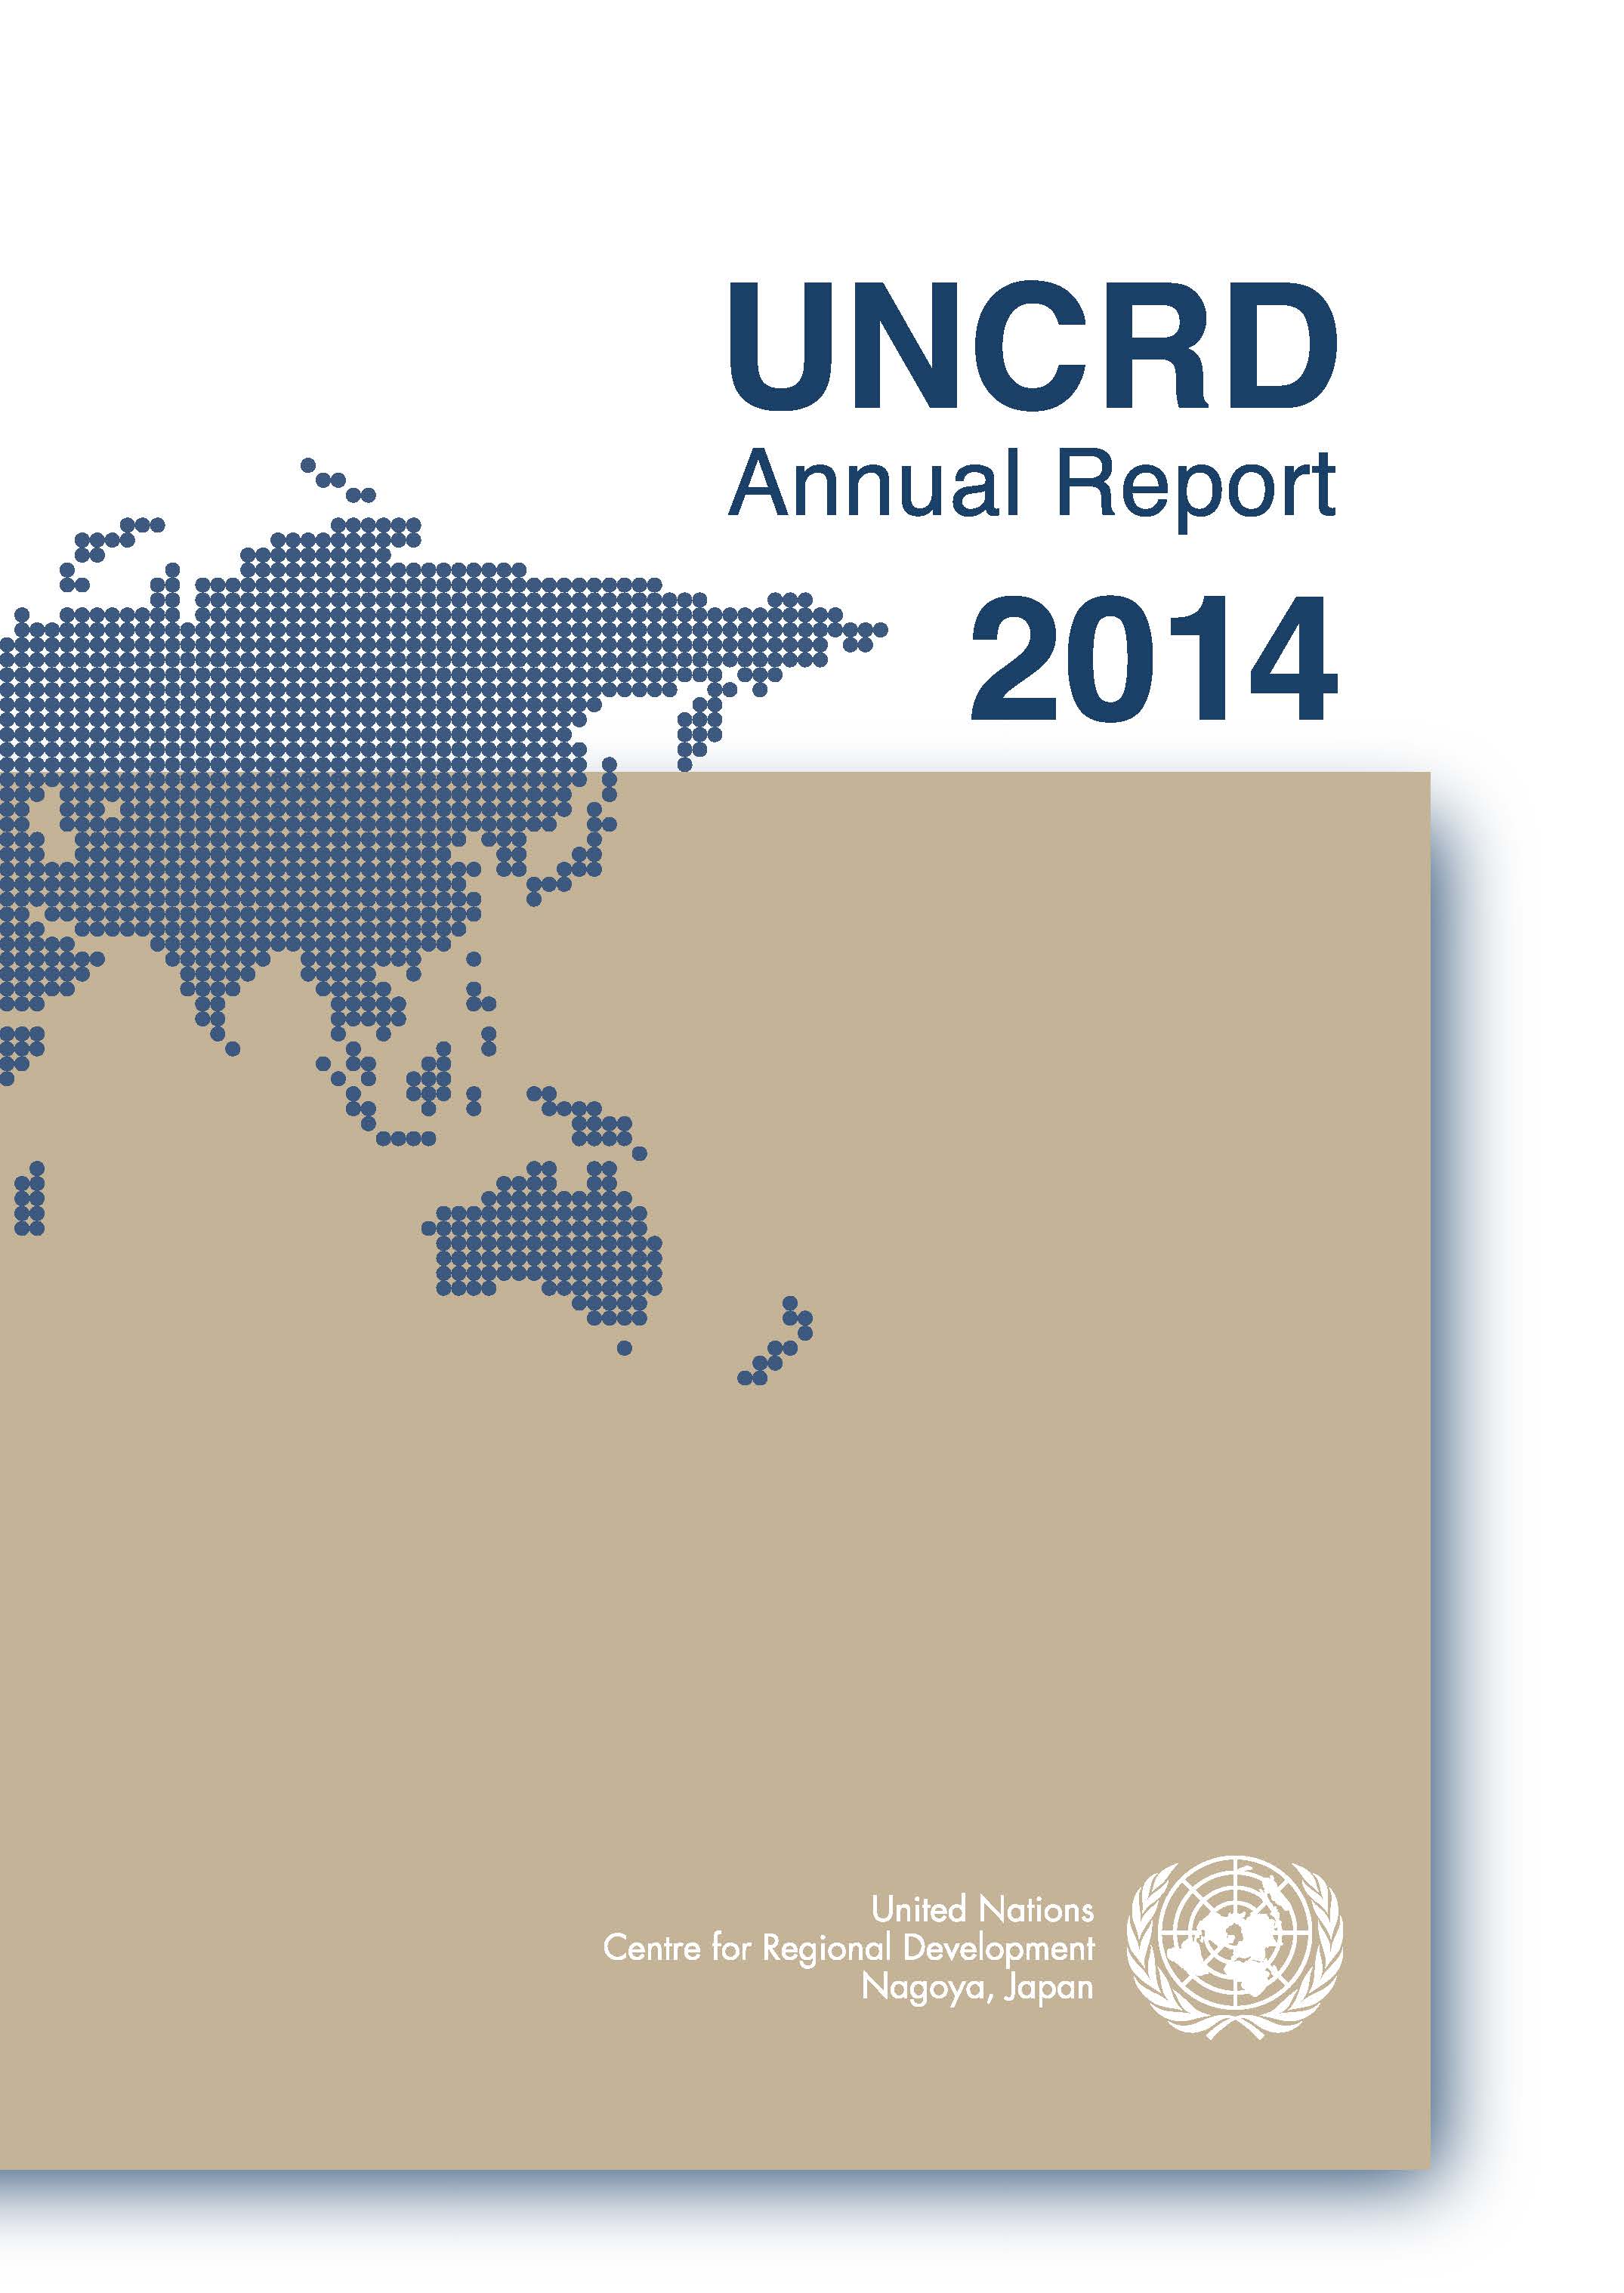 Cover of the UNCRD Annual Report 2014